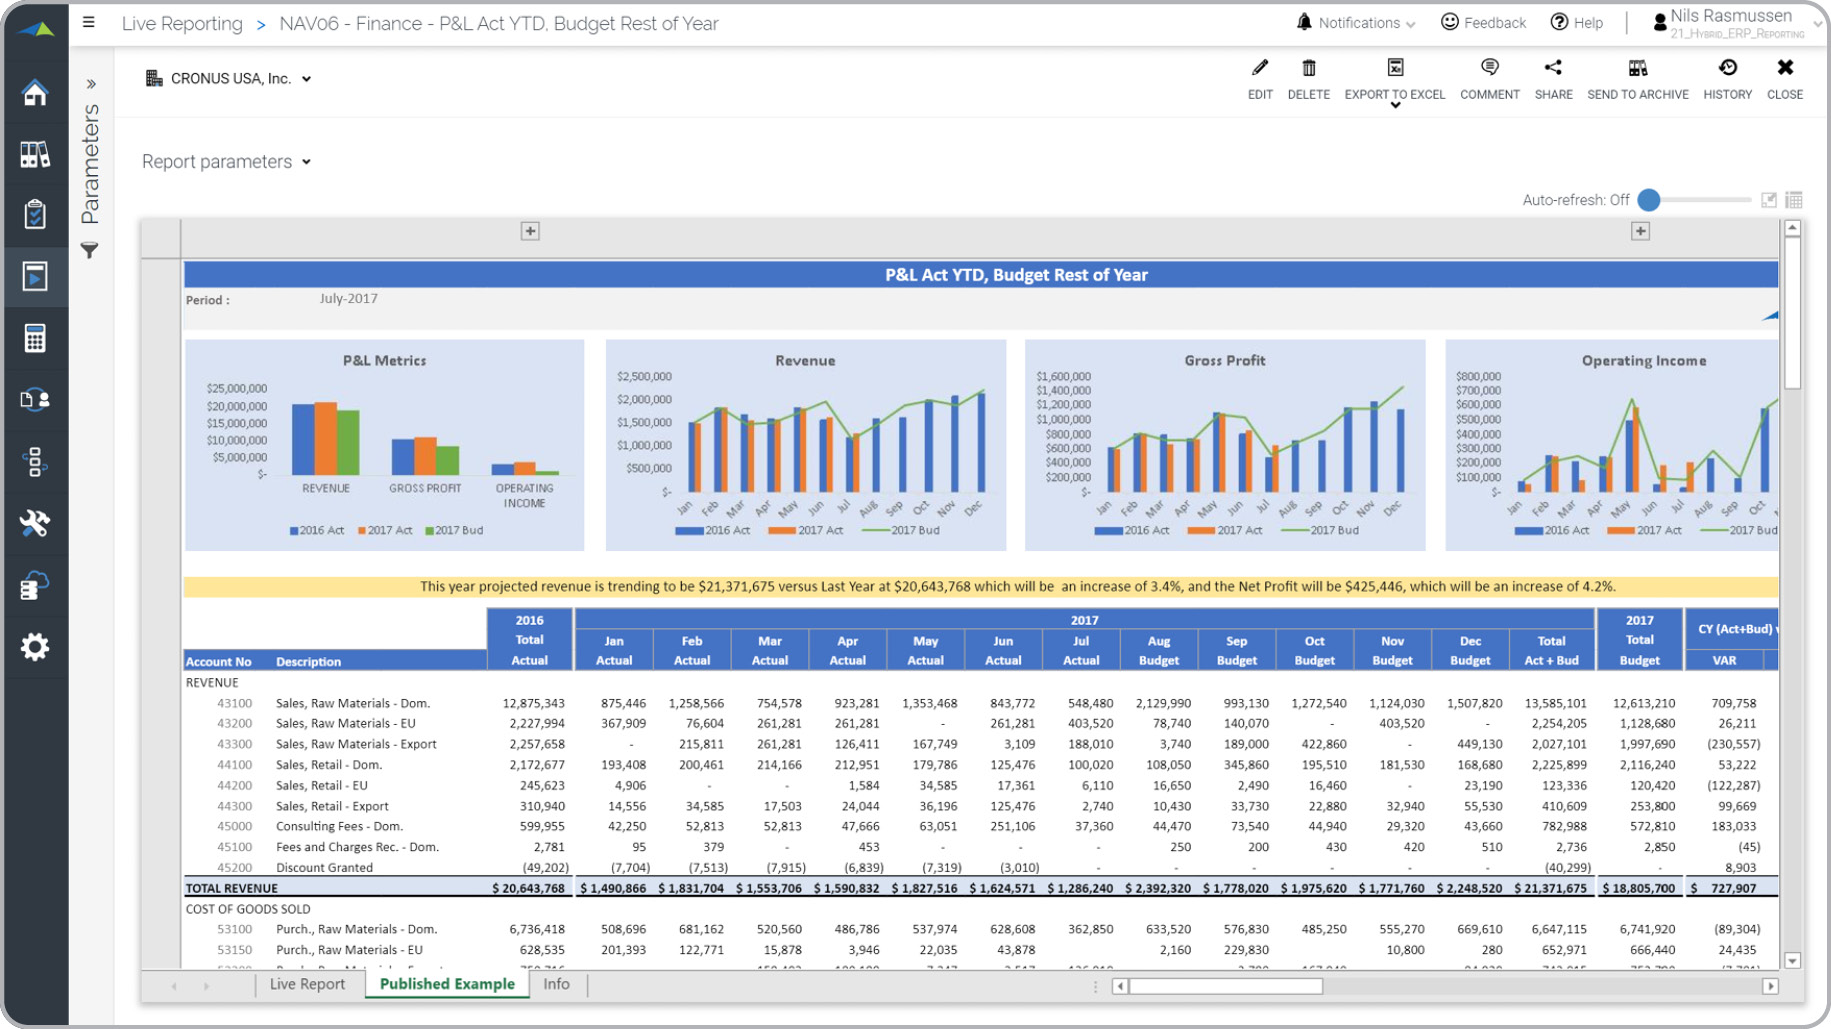 Report dynamically shows actual up to the current month and budget for the rest of the year.